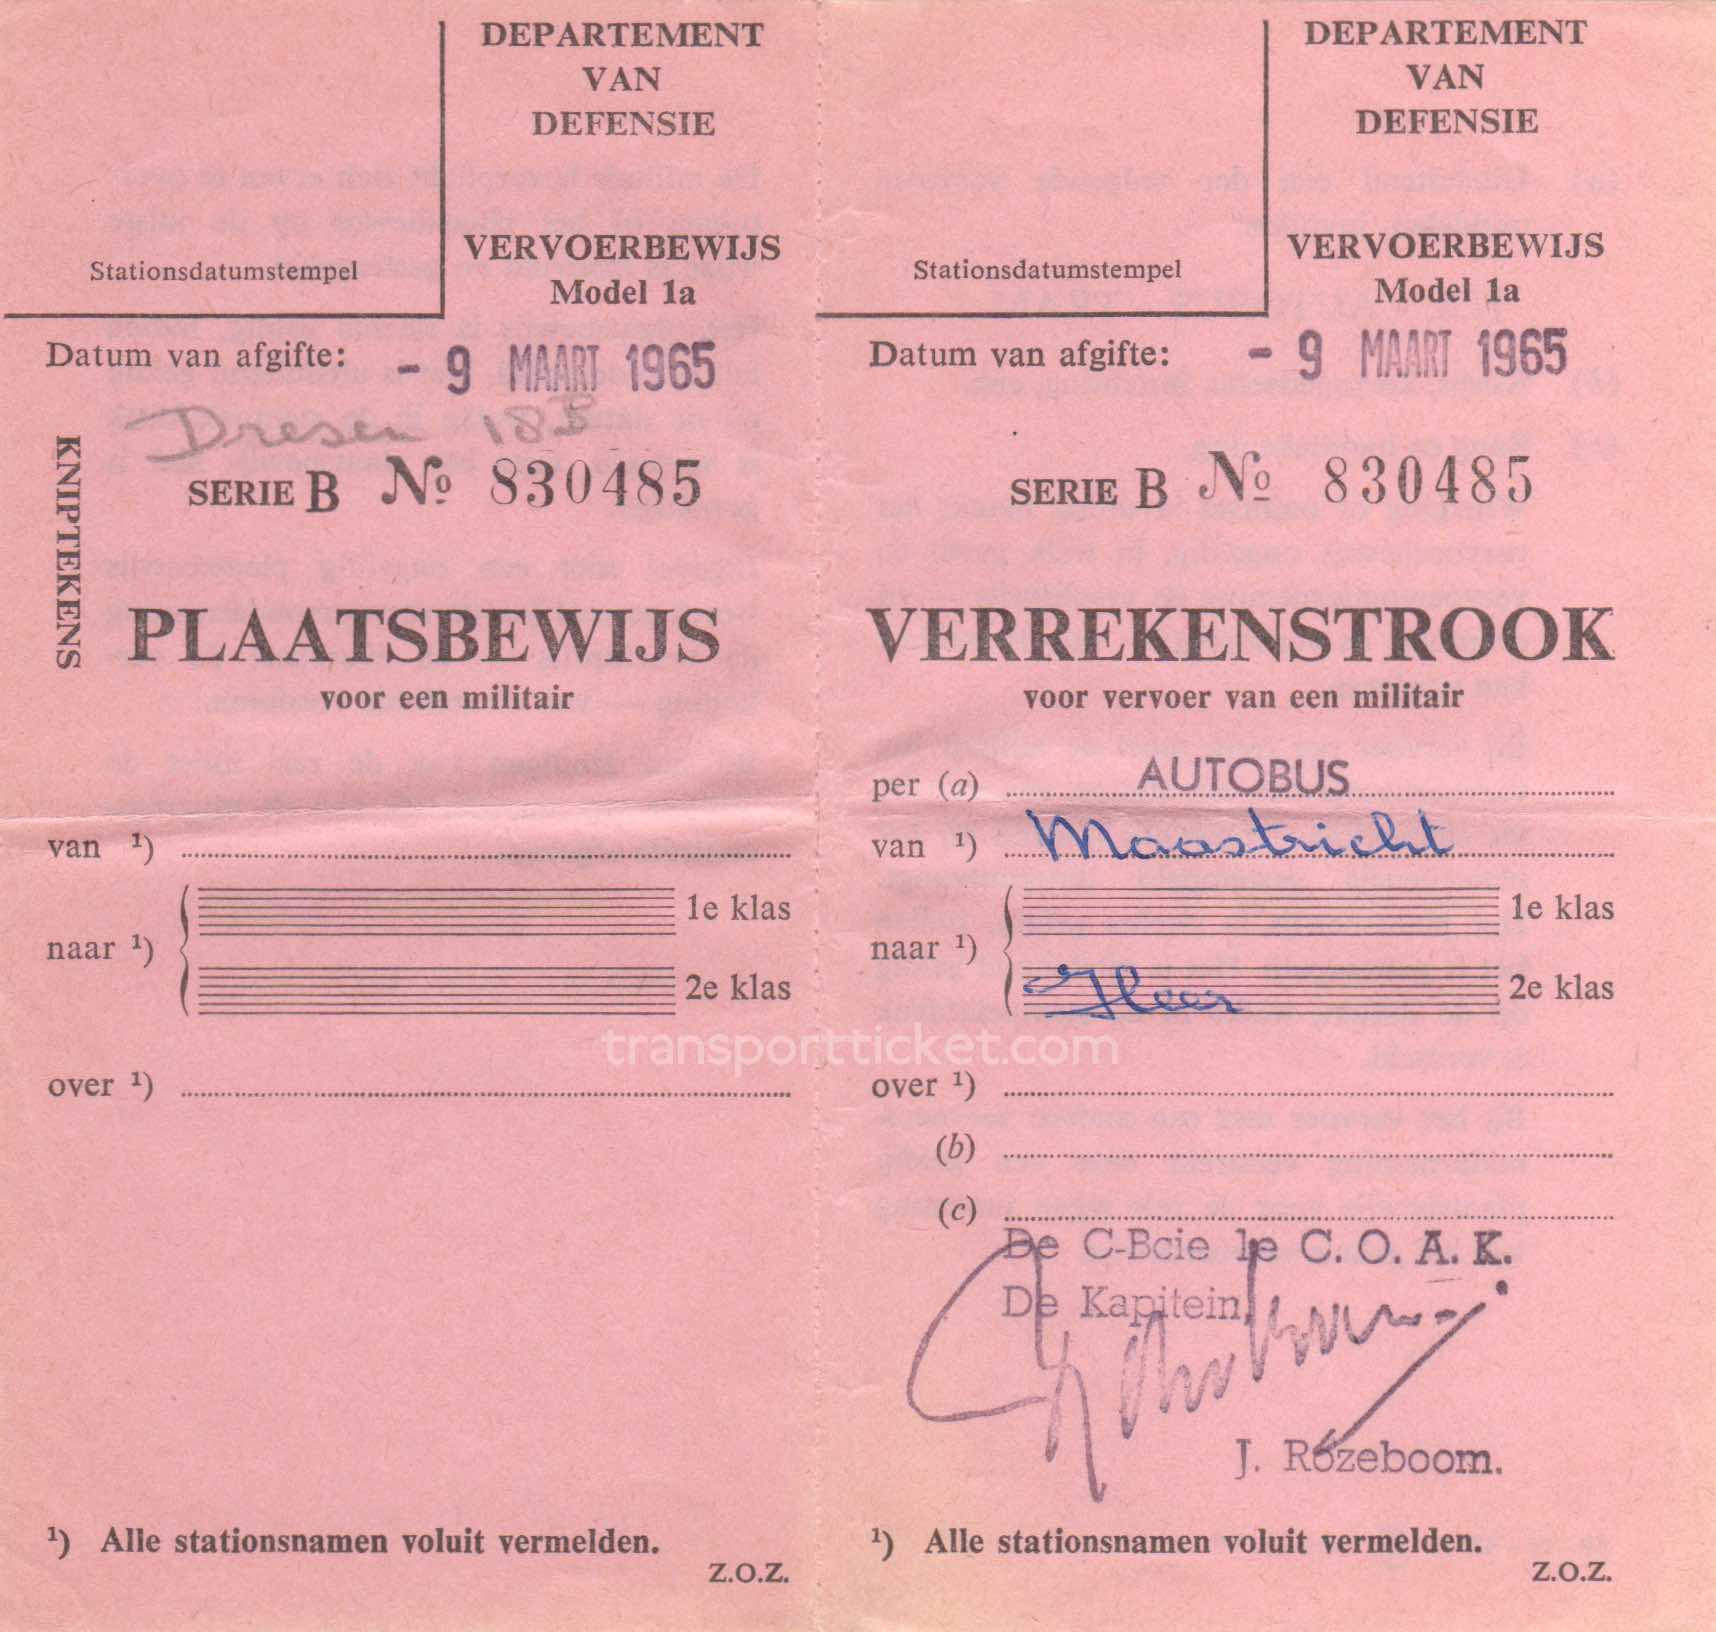 transport ticket issued by Dutch Department of Defense (1965)